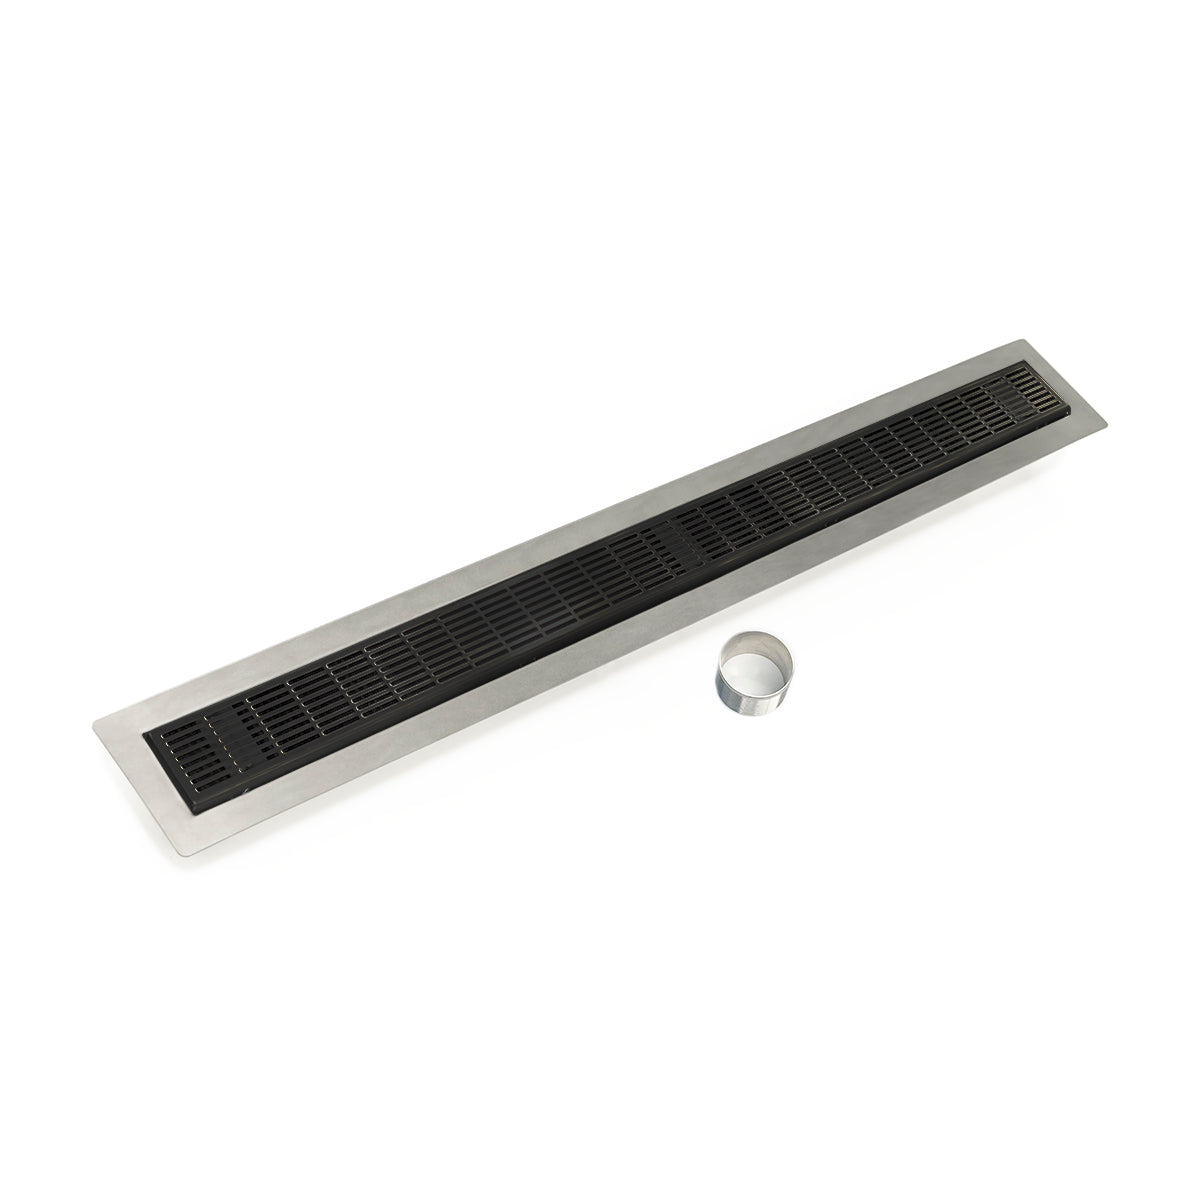 Infinity Drain 42" FCB Series Double Waterproofing Linear Drain Kit with 2 1/2" Perforated Slotted Grate